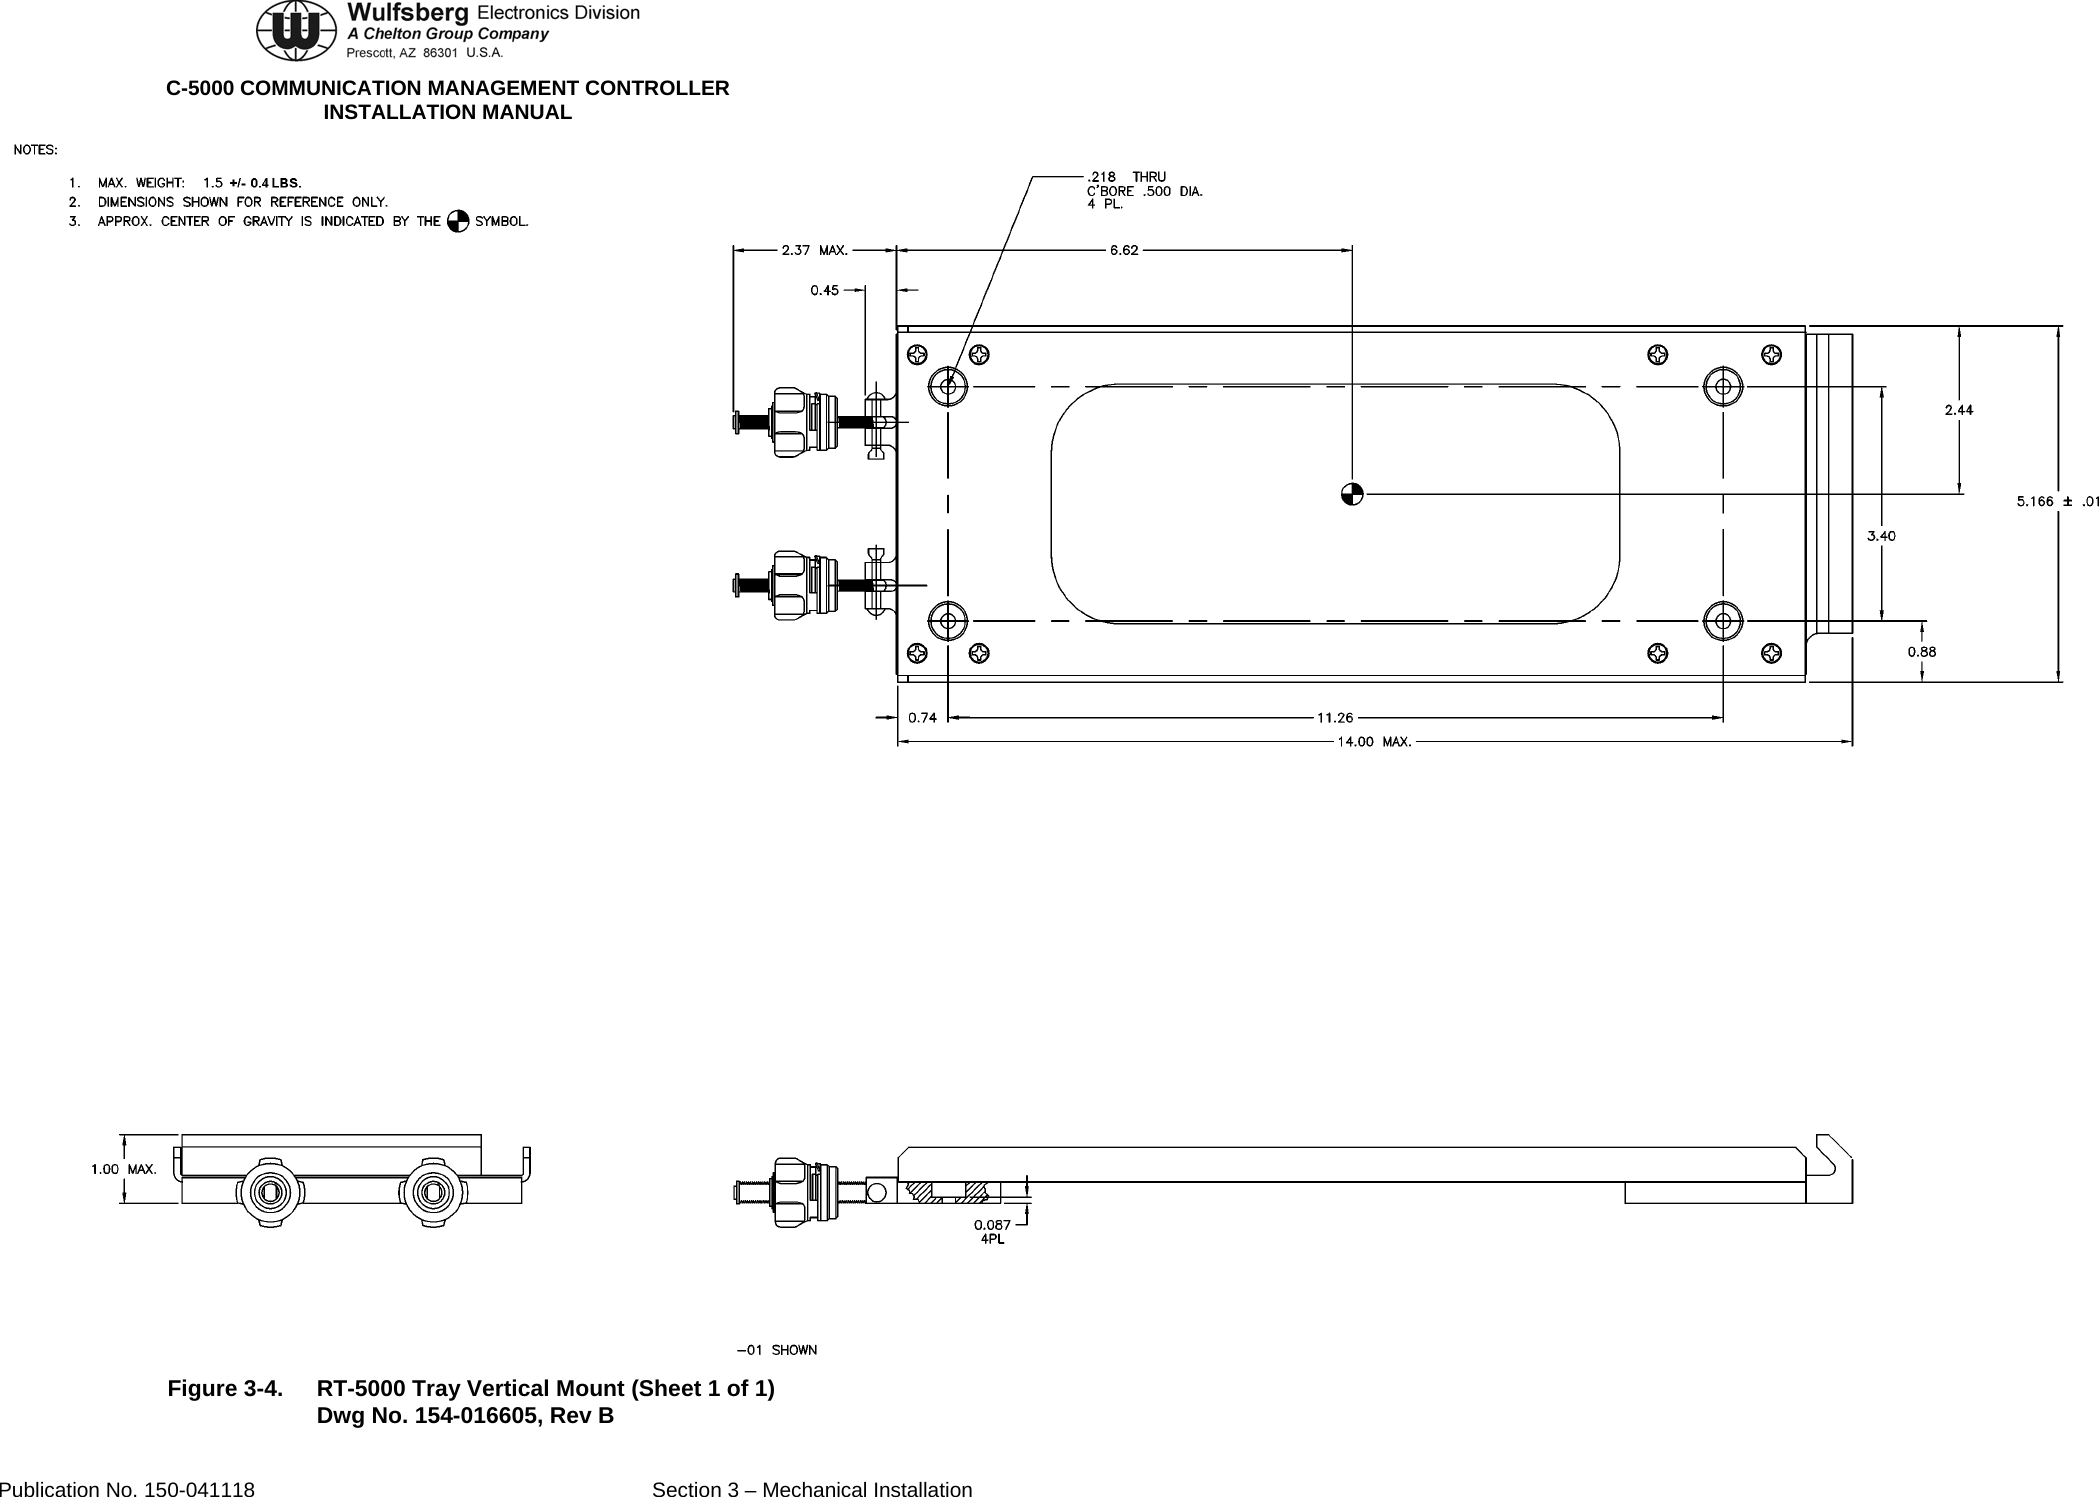  C-5000 COMMUNICATION MANAGEMENT CONTROLLER INSTALLATION MANUAL  Figure 3-4.  RT-5000 Tray Vertical Mount (Sheet 1 of 1) Dwg No. 154-016605, Rev B Publication No. 150-041118  Section 3 – Mechanical Installation 